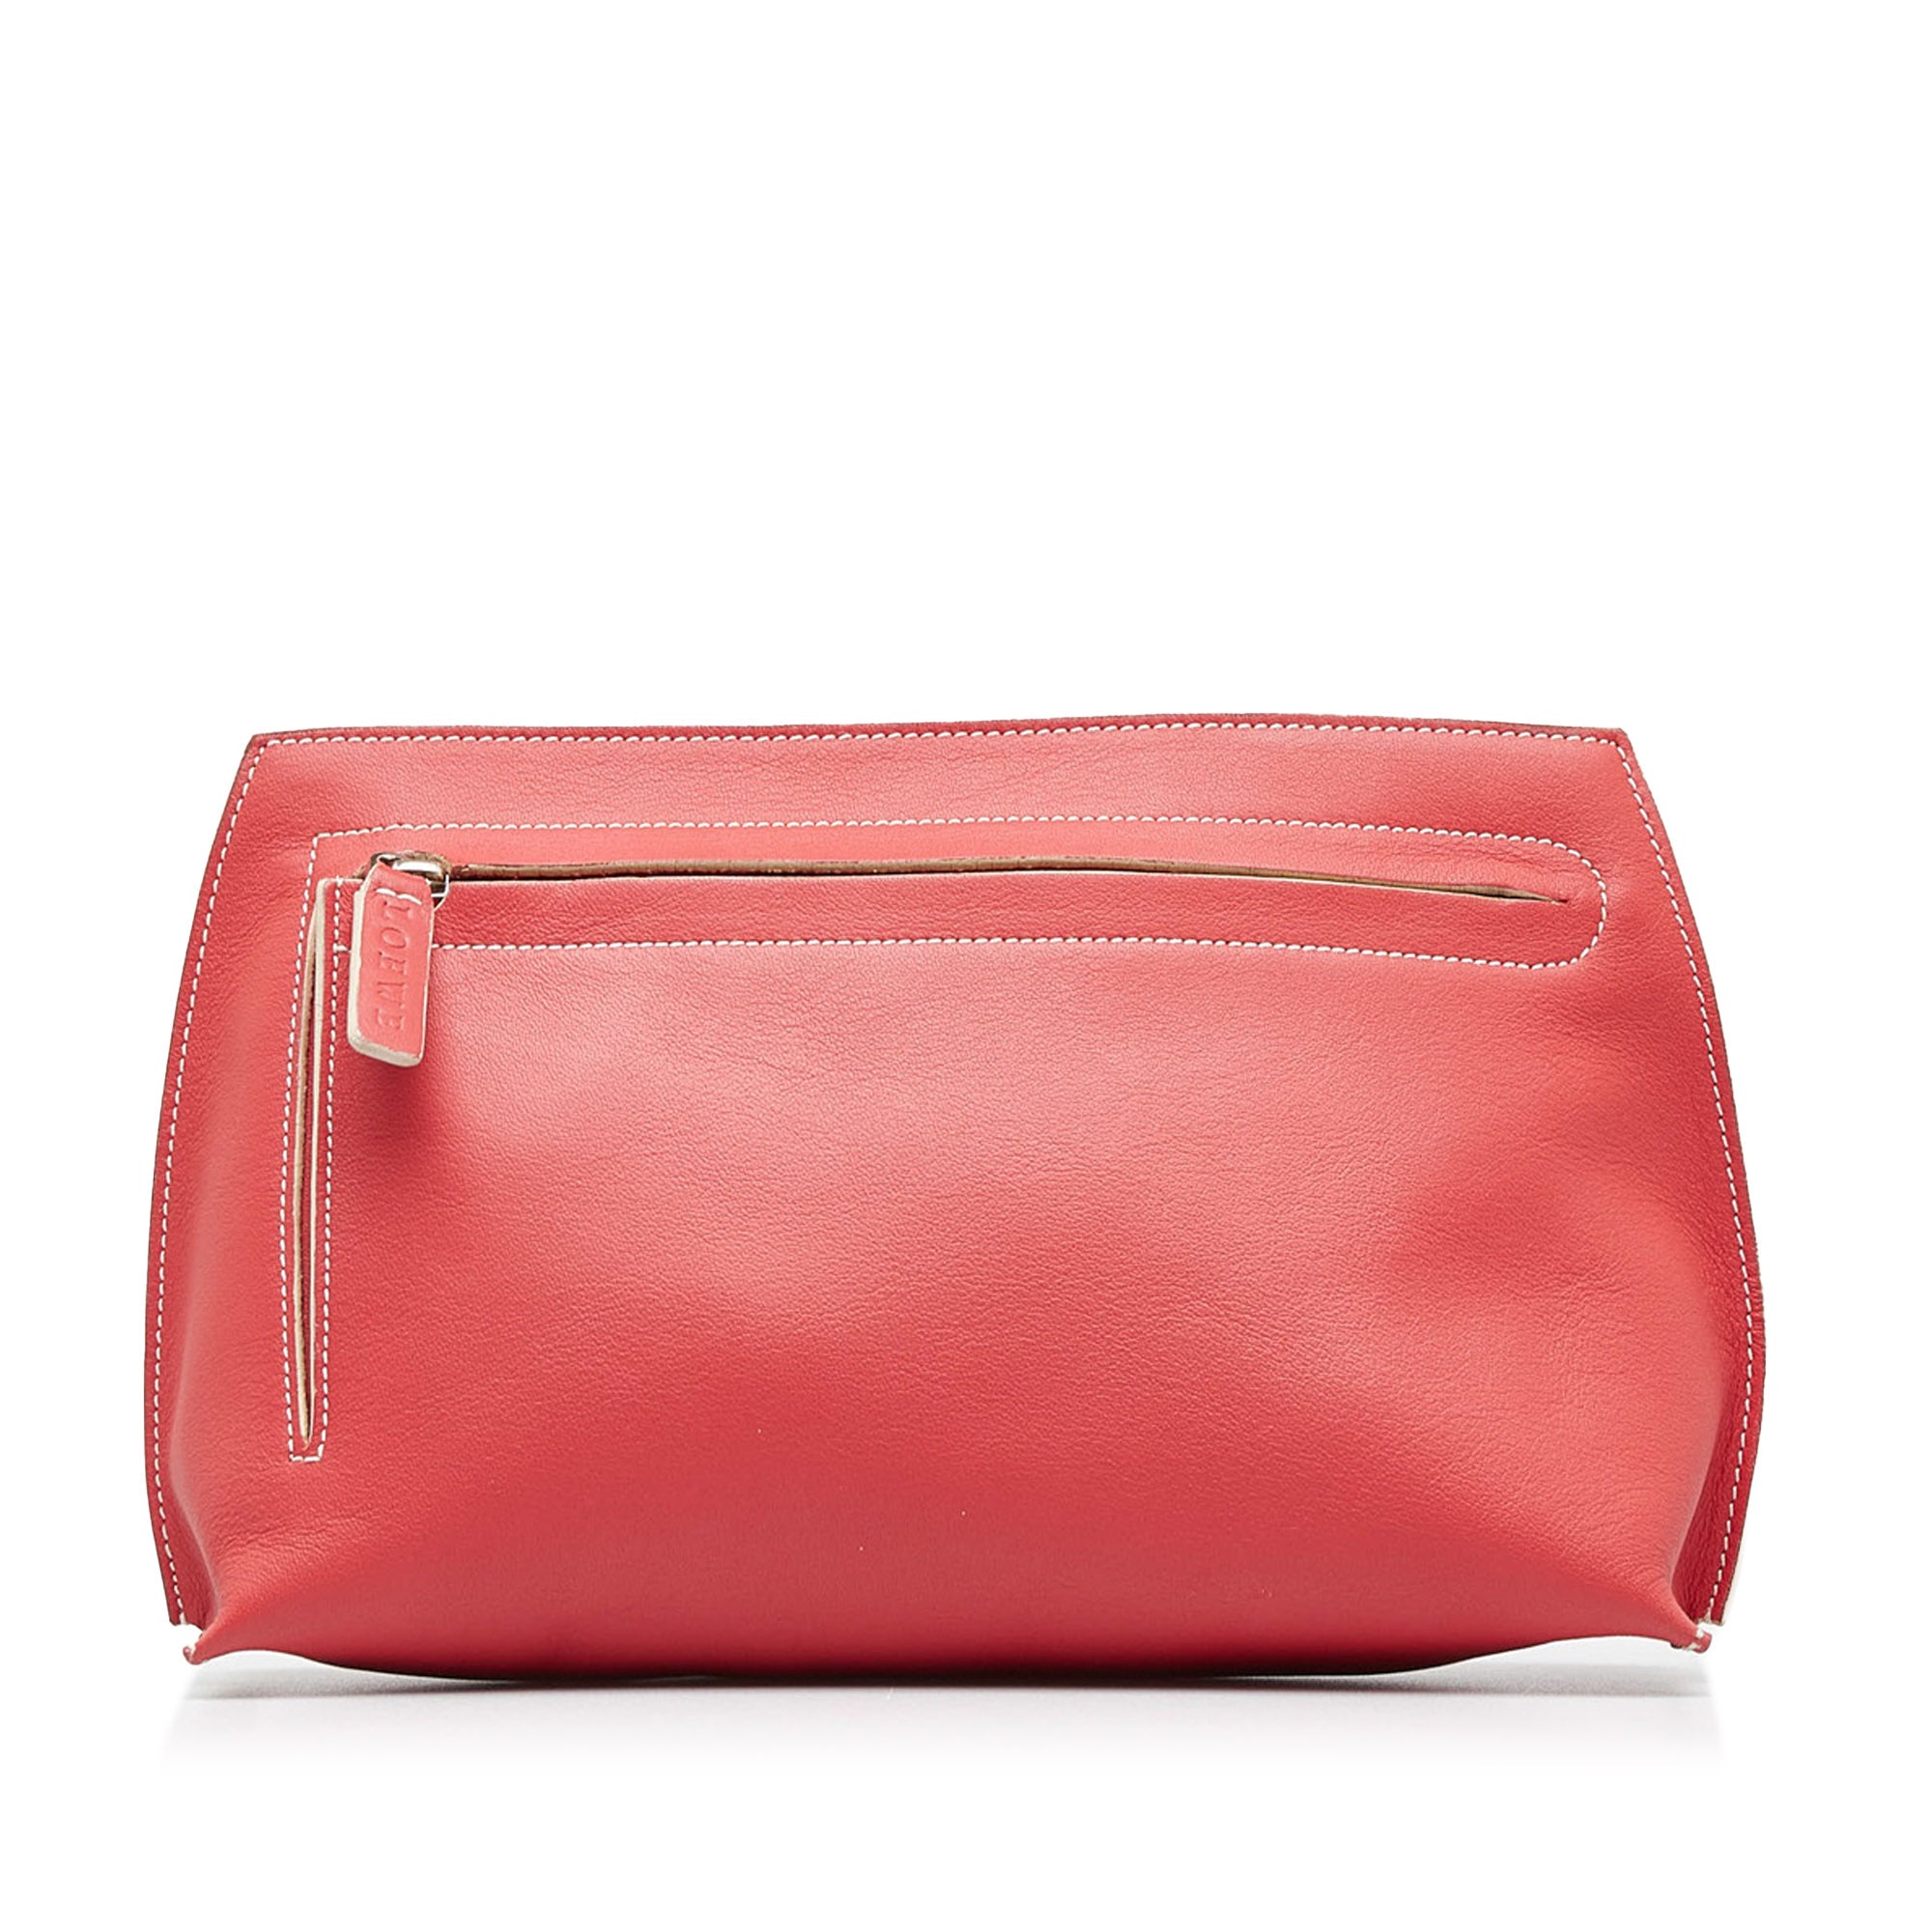 peek at my Loewe Puzzle bag in March, Pink Loewe Leather Pouch